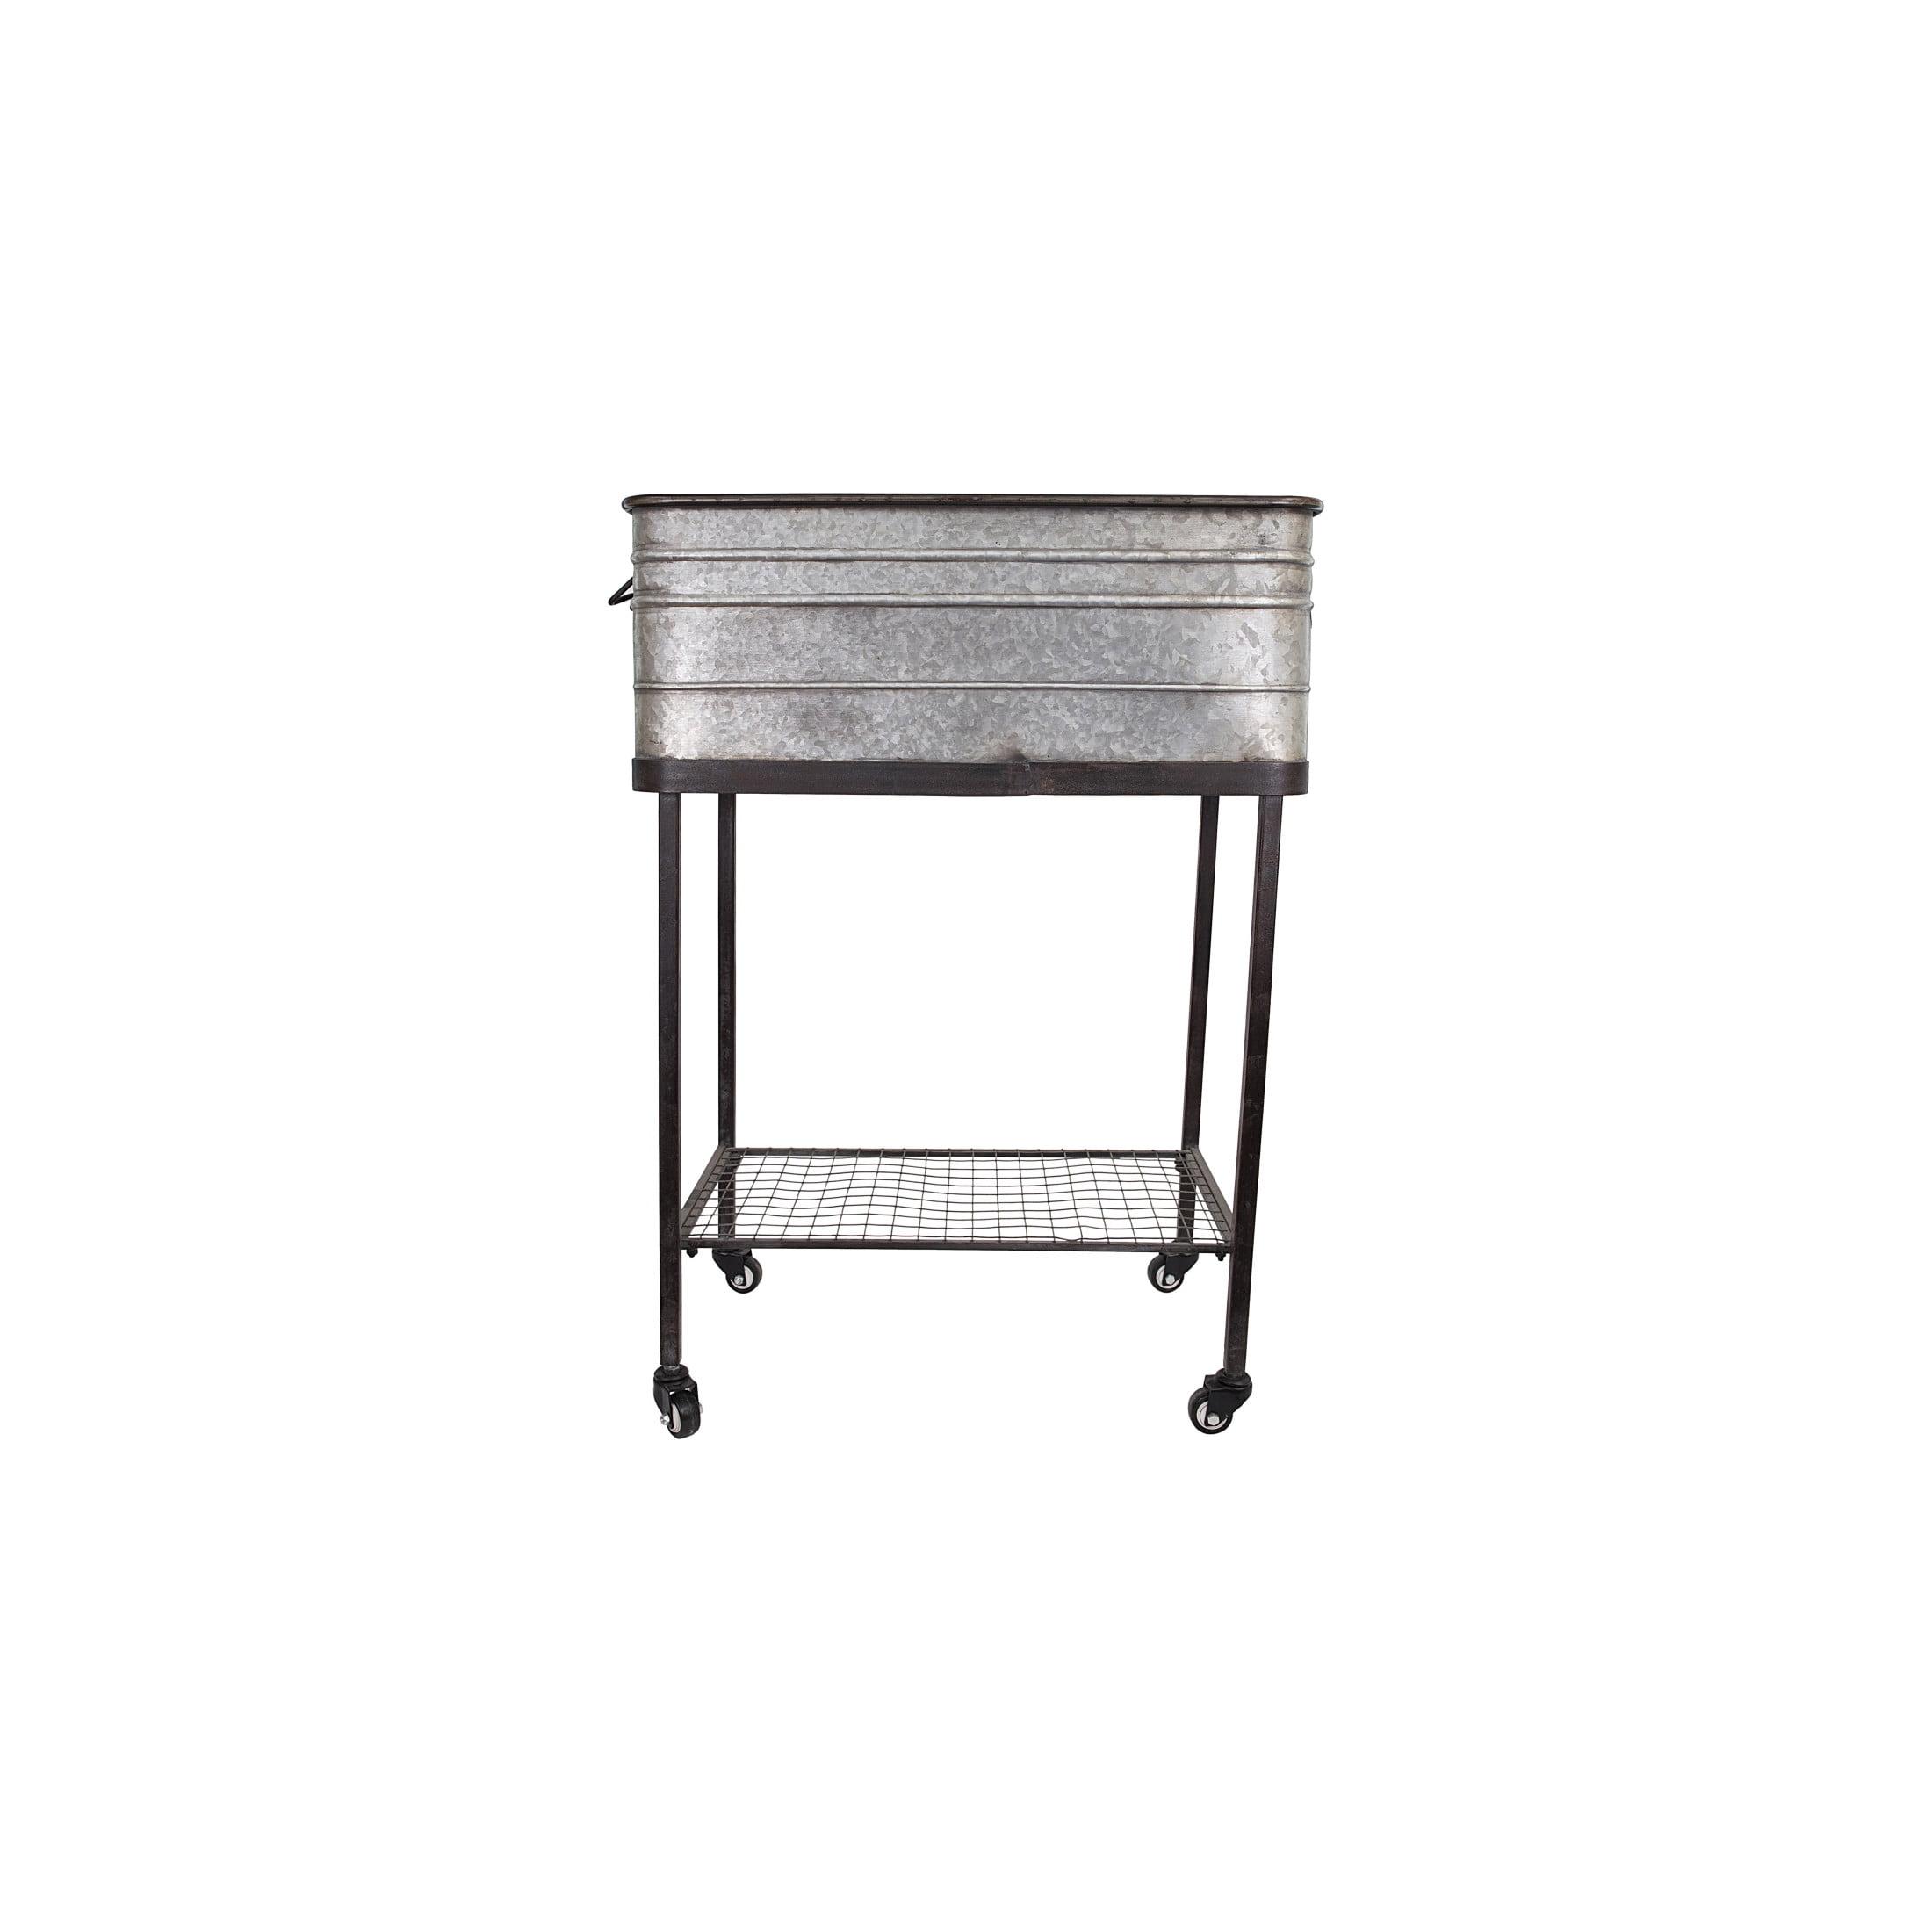 Galvanized Silver and Black Metal Planter Tub on Casters